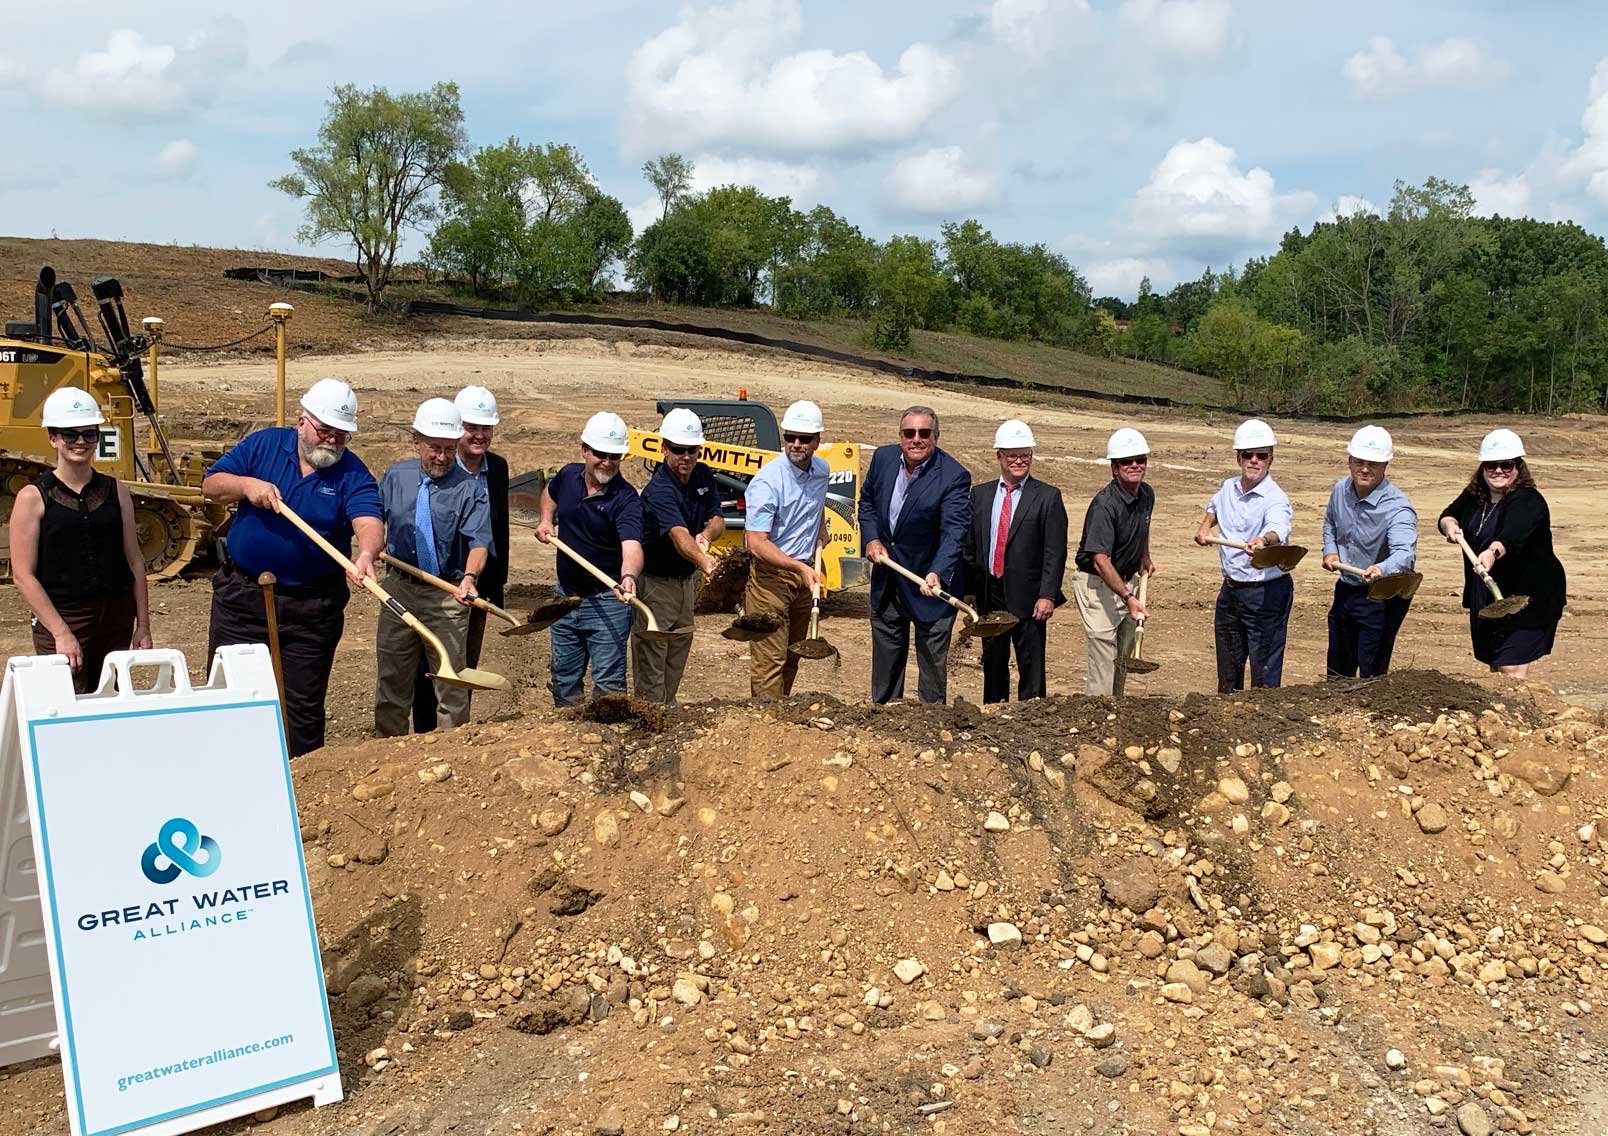 Government officials' shoveling dirt at groundbreaking event at Waukesha Booster Pumping Station site